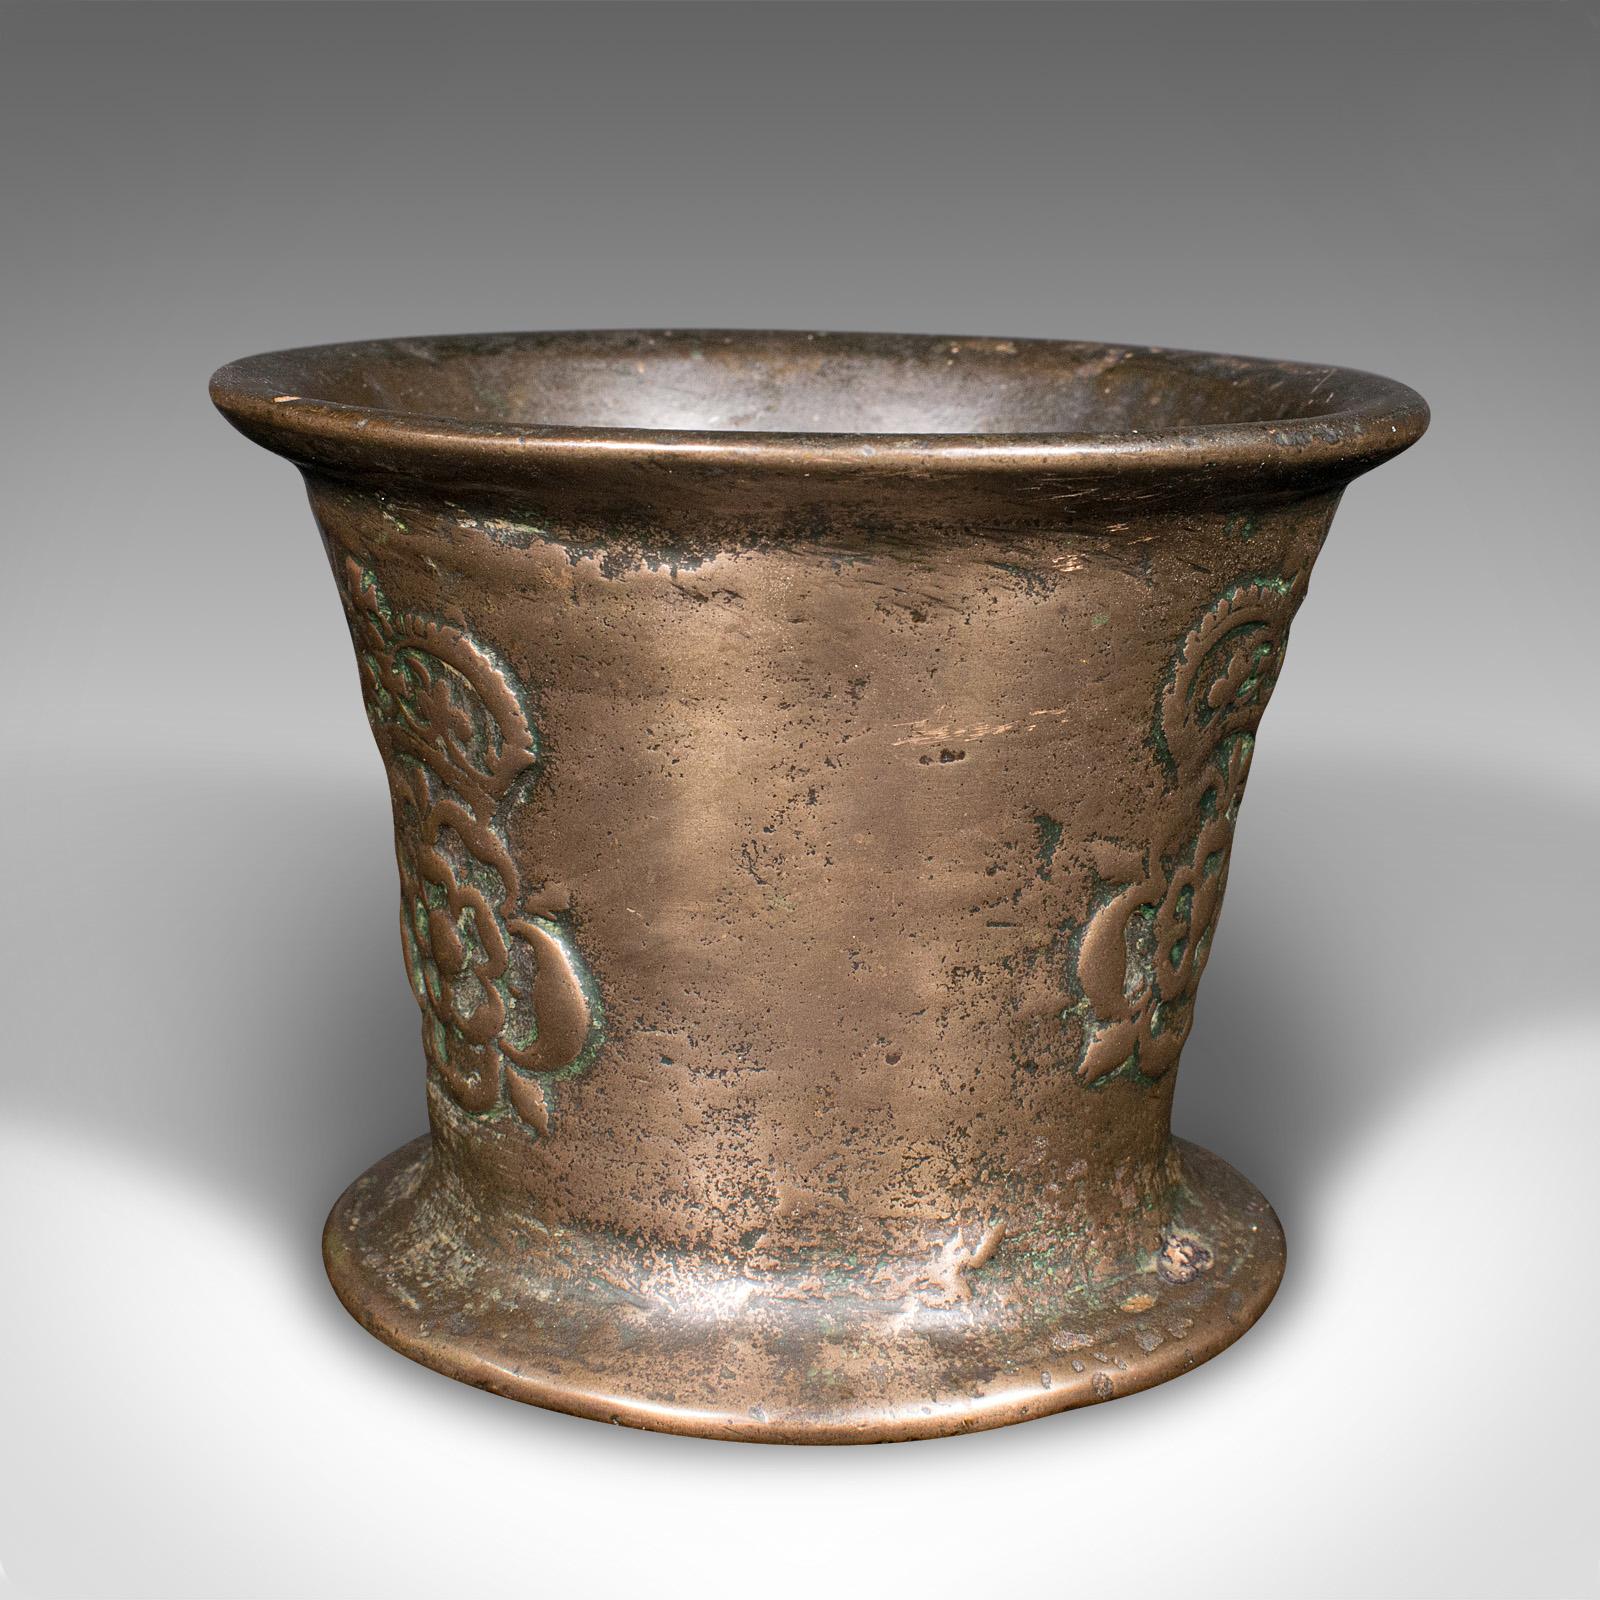 British Antique Tudor Rose Mortar And Pestle, English, Bronze, Apothecary, 17th Century For Sale